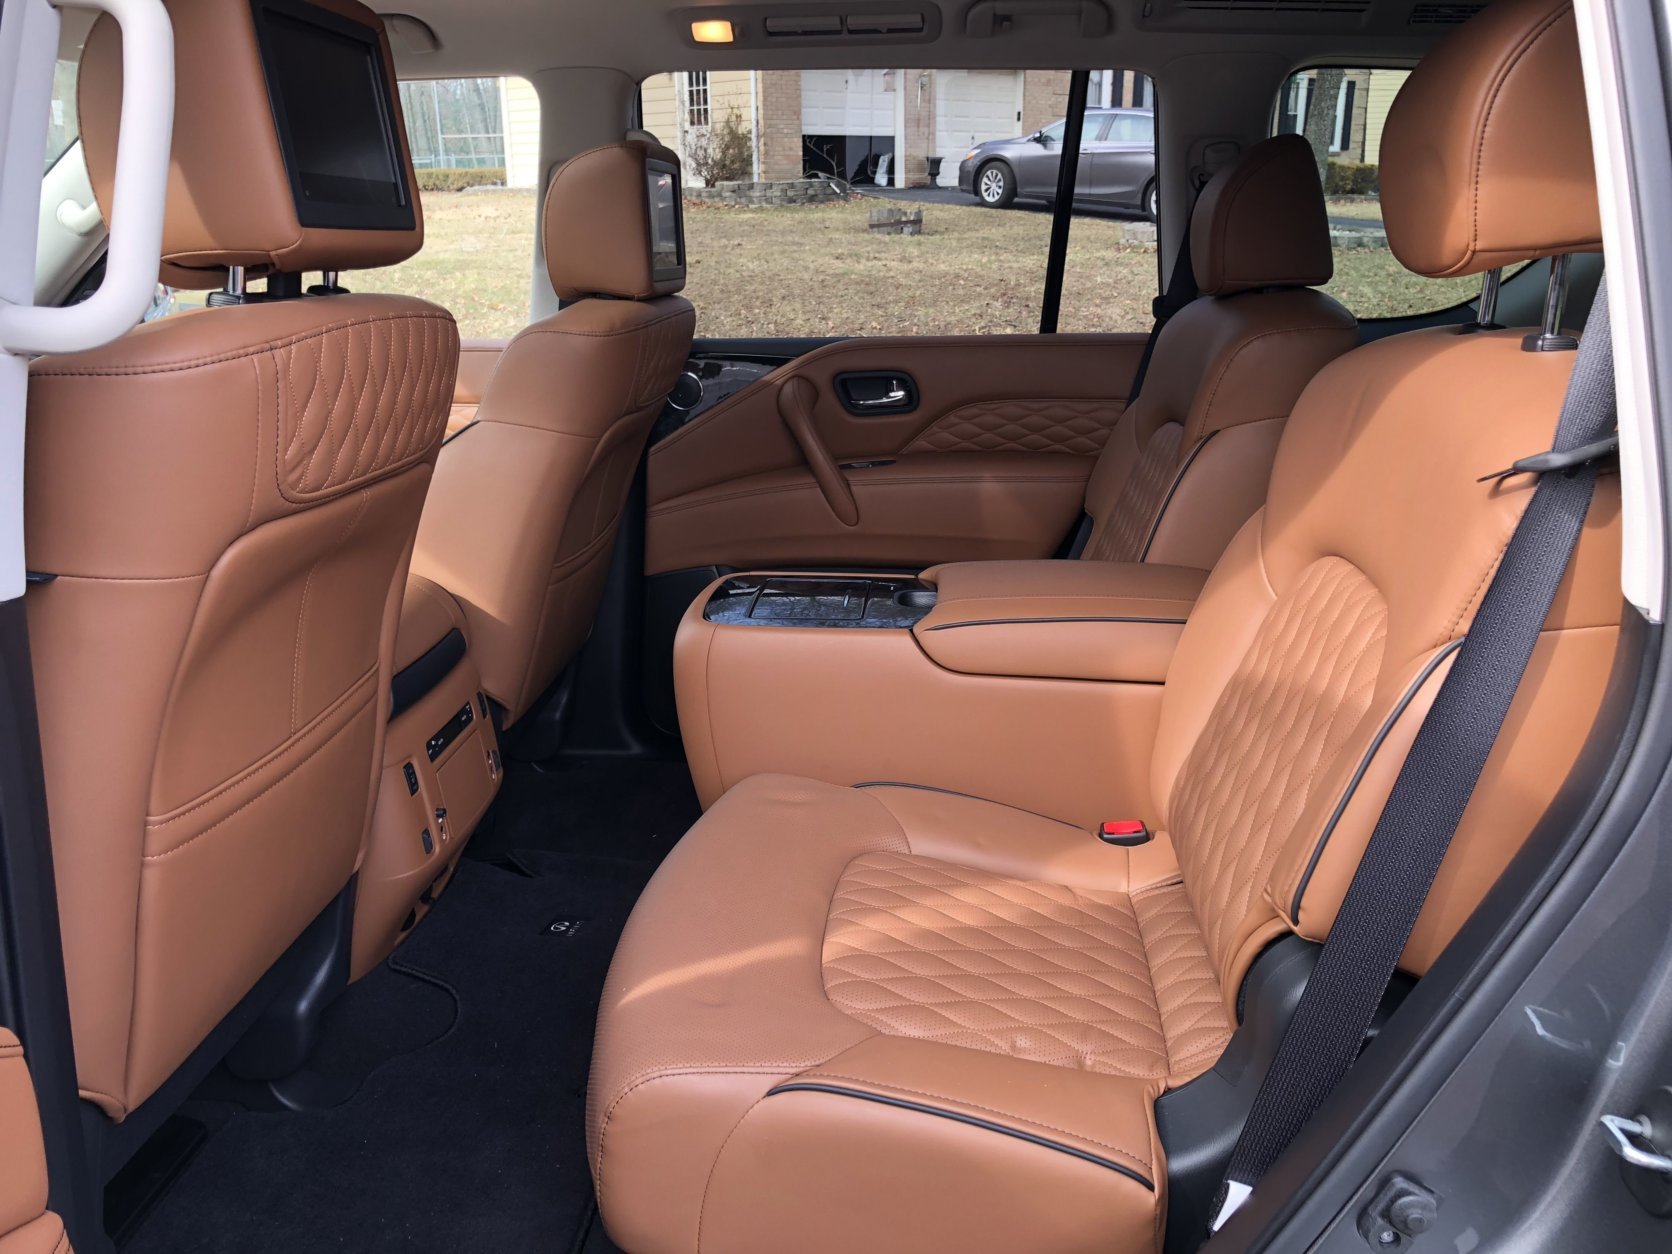 The inside of the Infiniti QX80 offers a plush environment with plenty of space. (WTOP/Mike Parris)